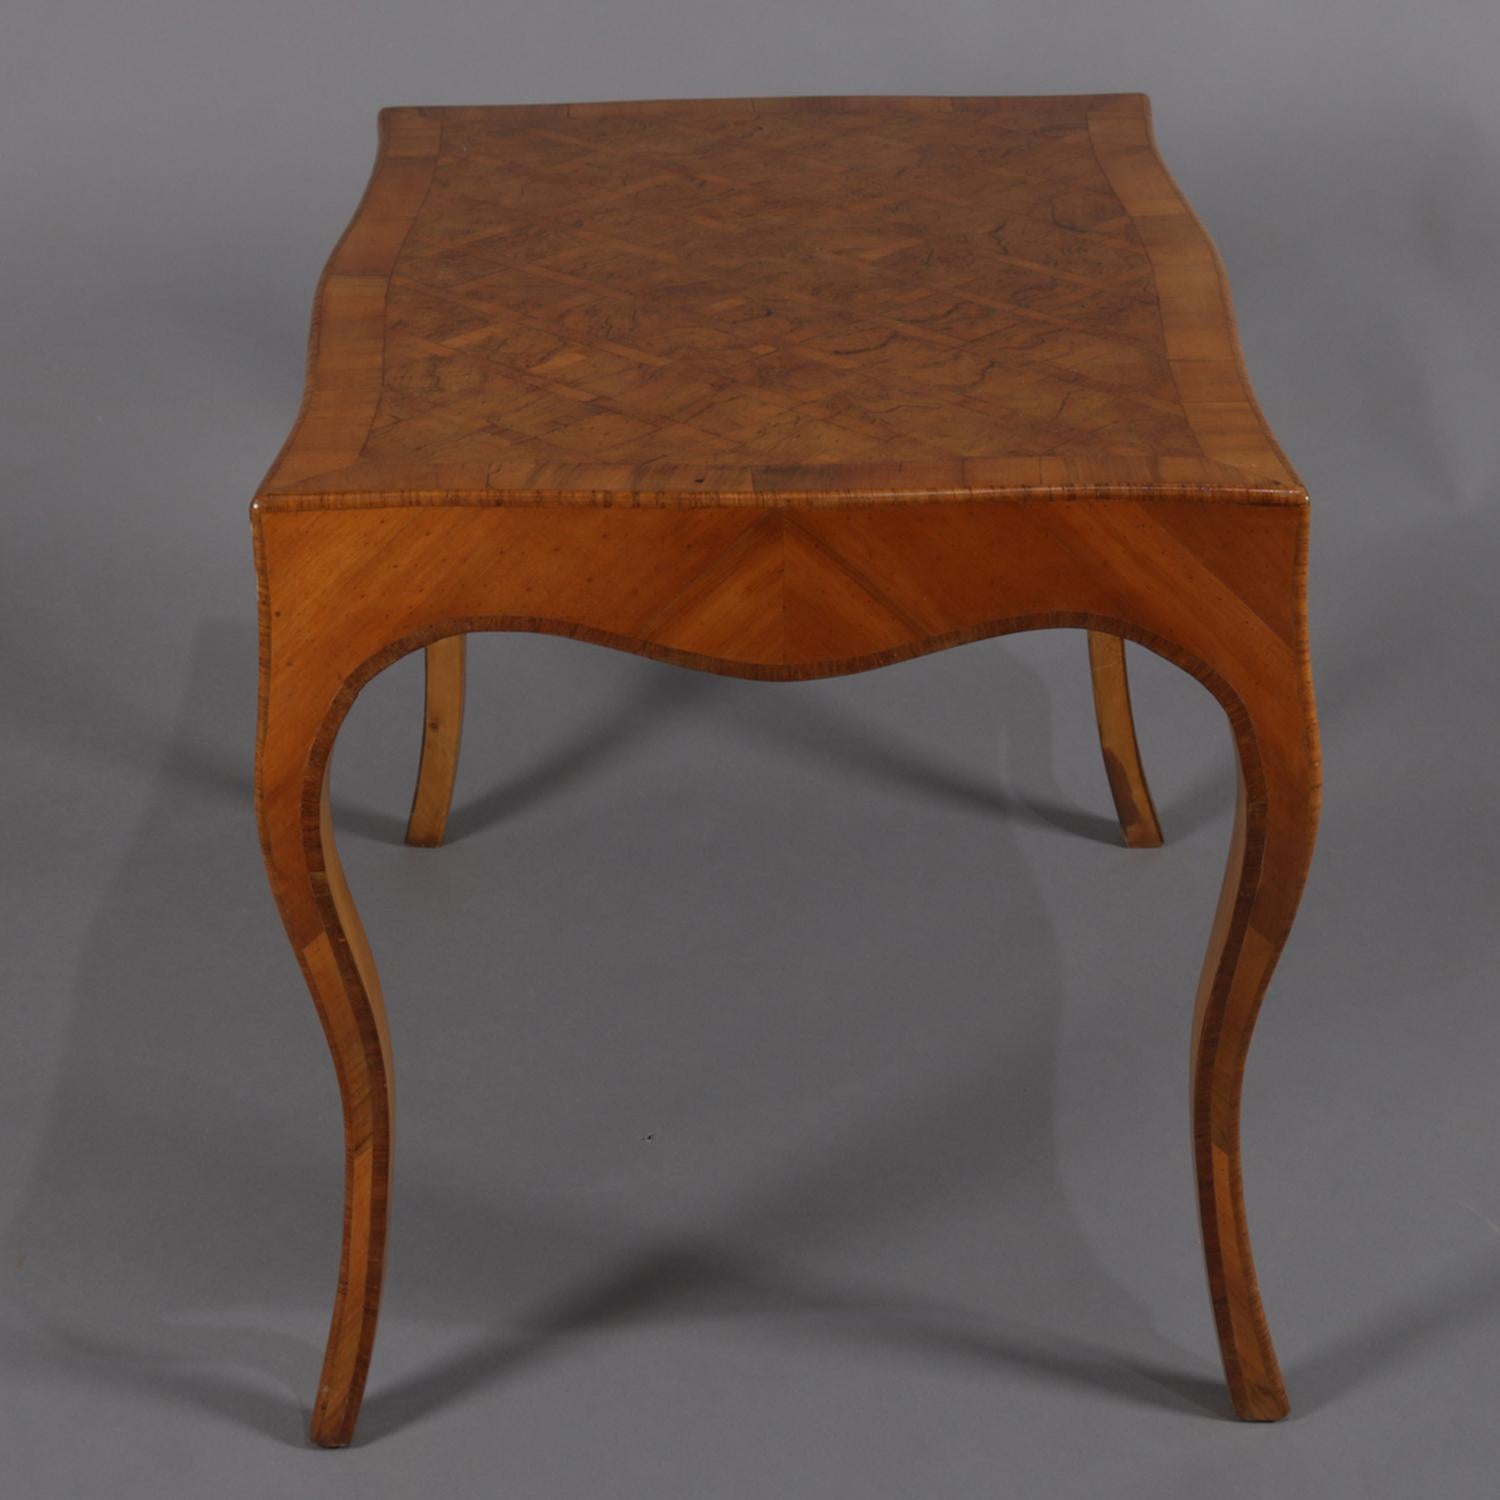 Antique Italian Parquetry Inlaid Mahogany Low Centre Cocktail Table 19th Century 3